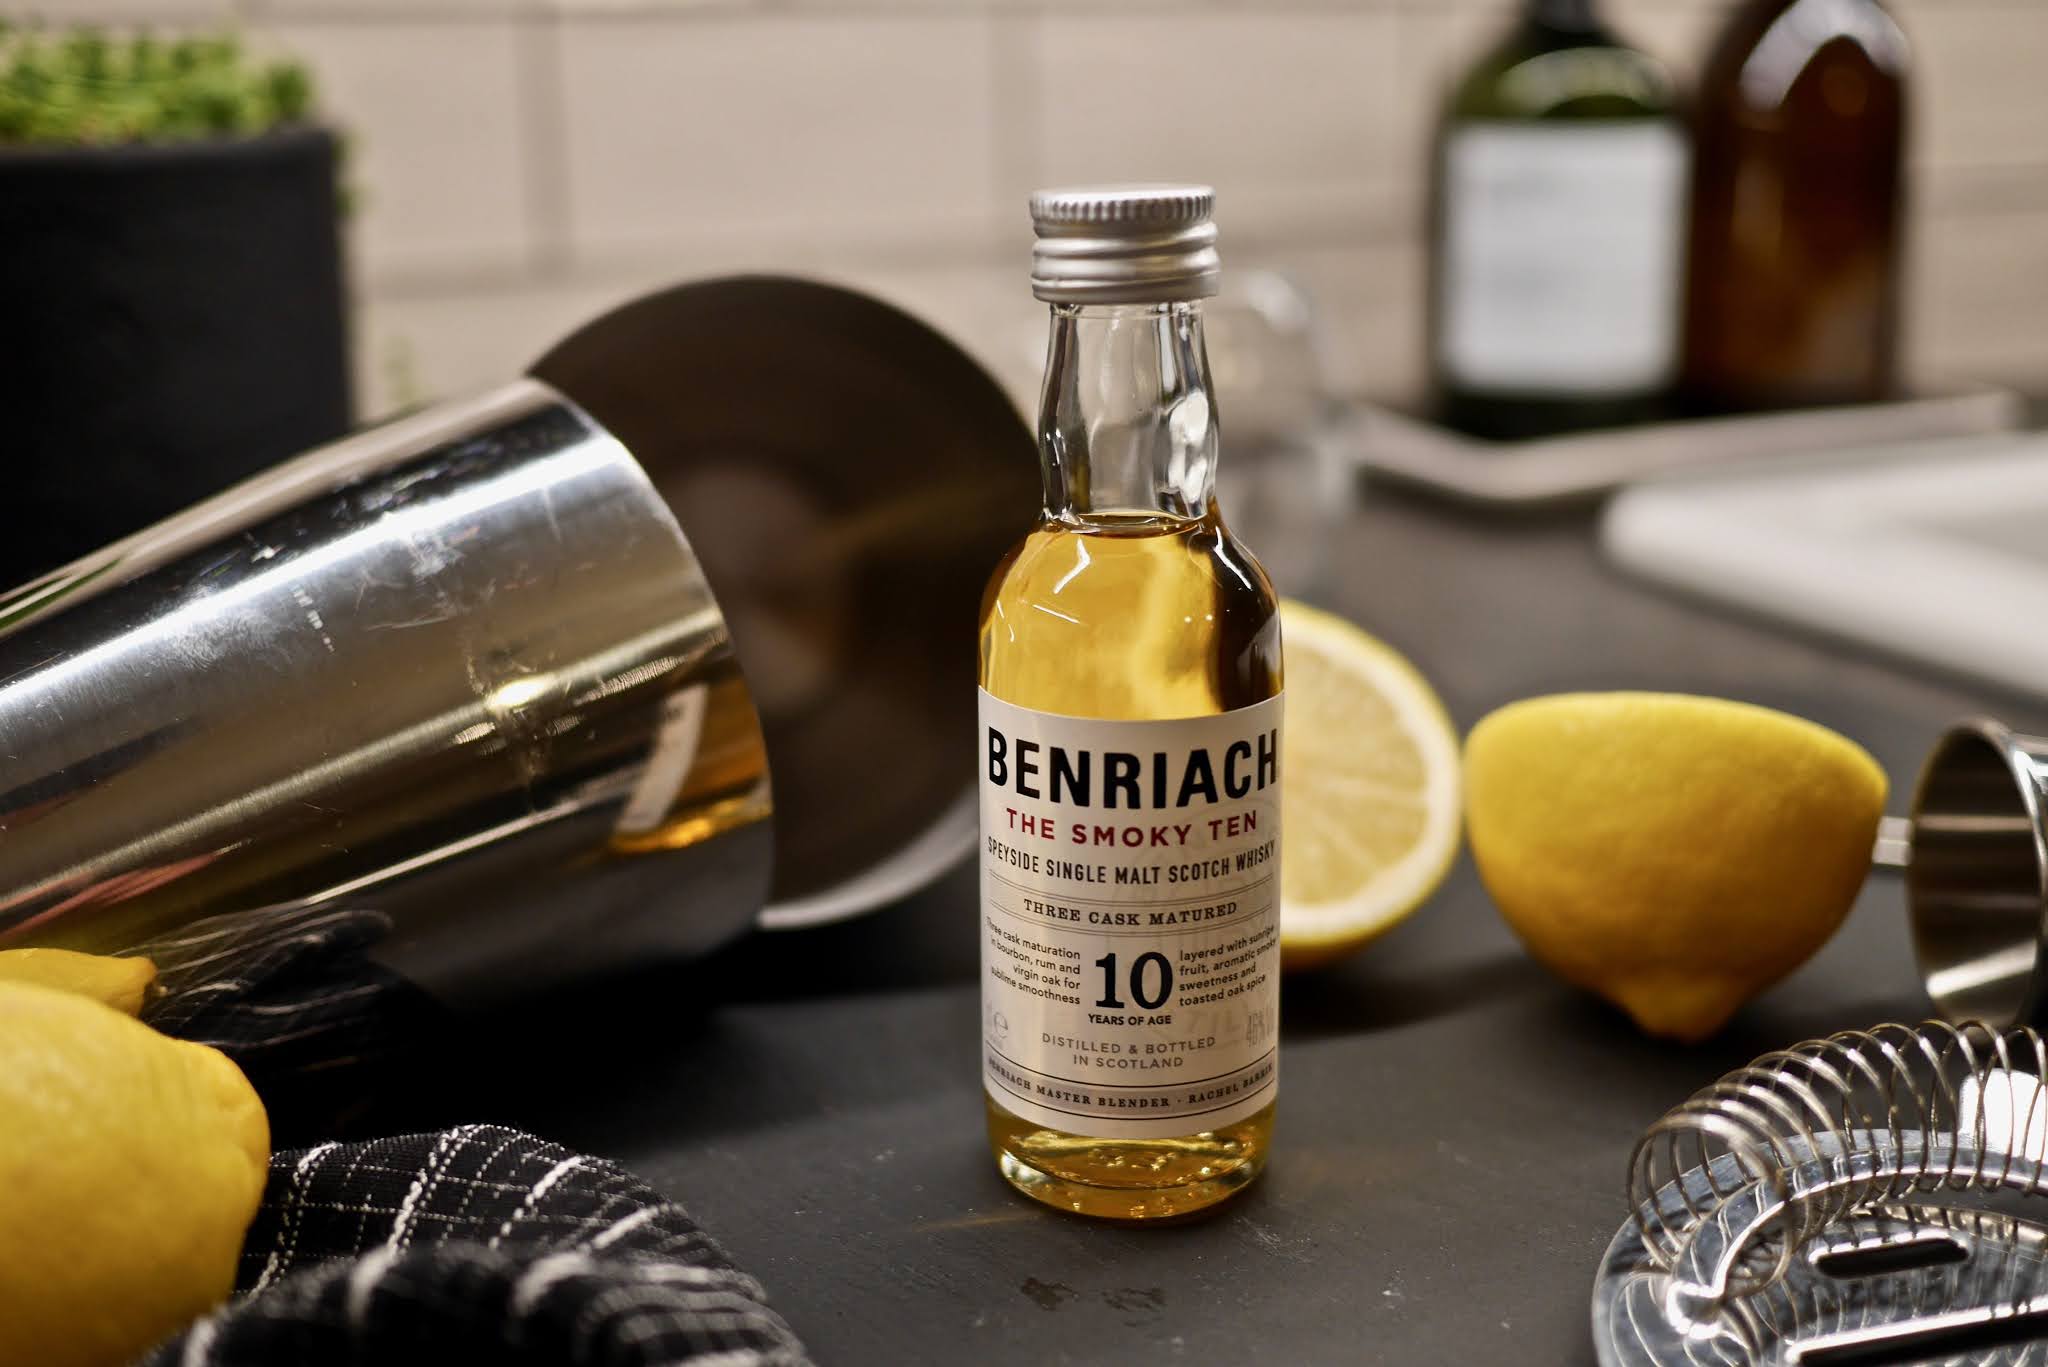 benRiach whisky sour cocktails, by calmctravels 1